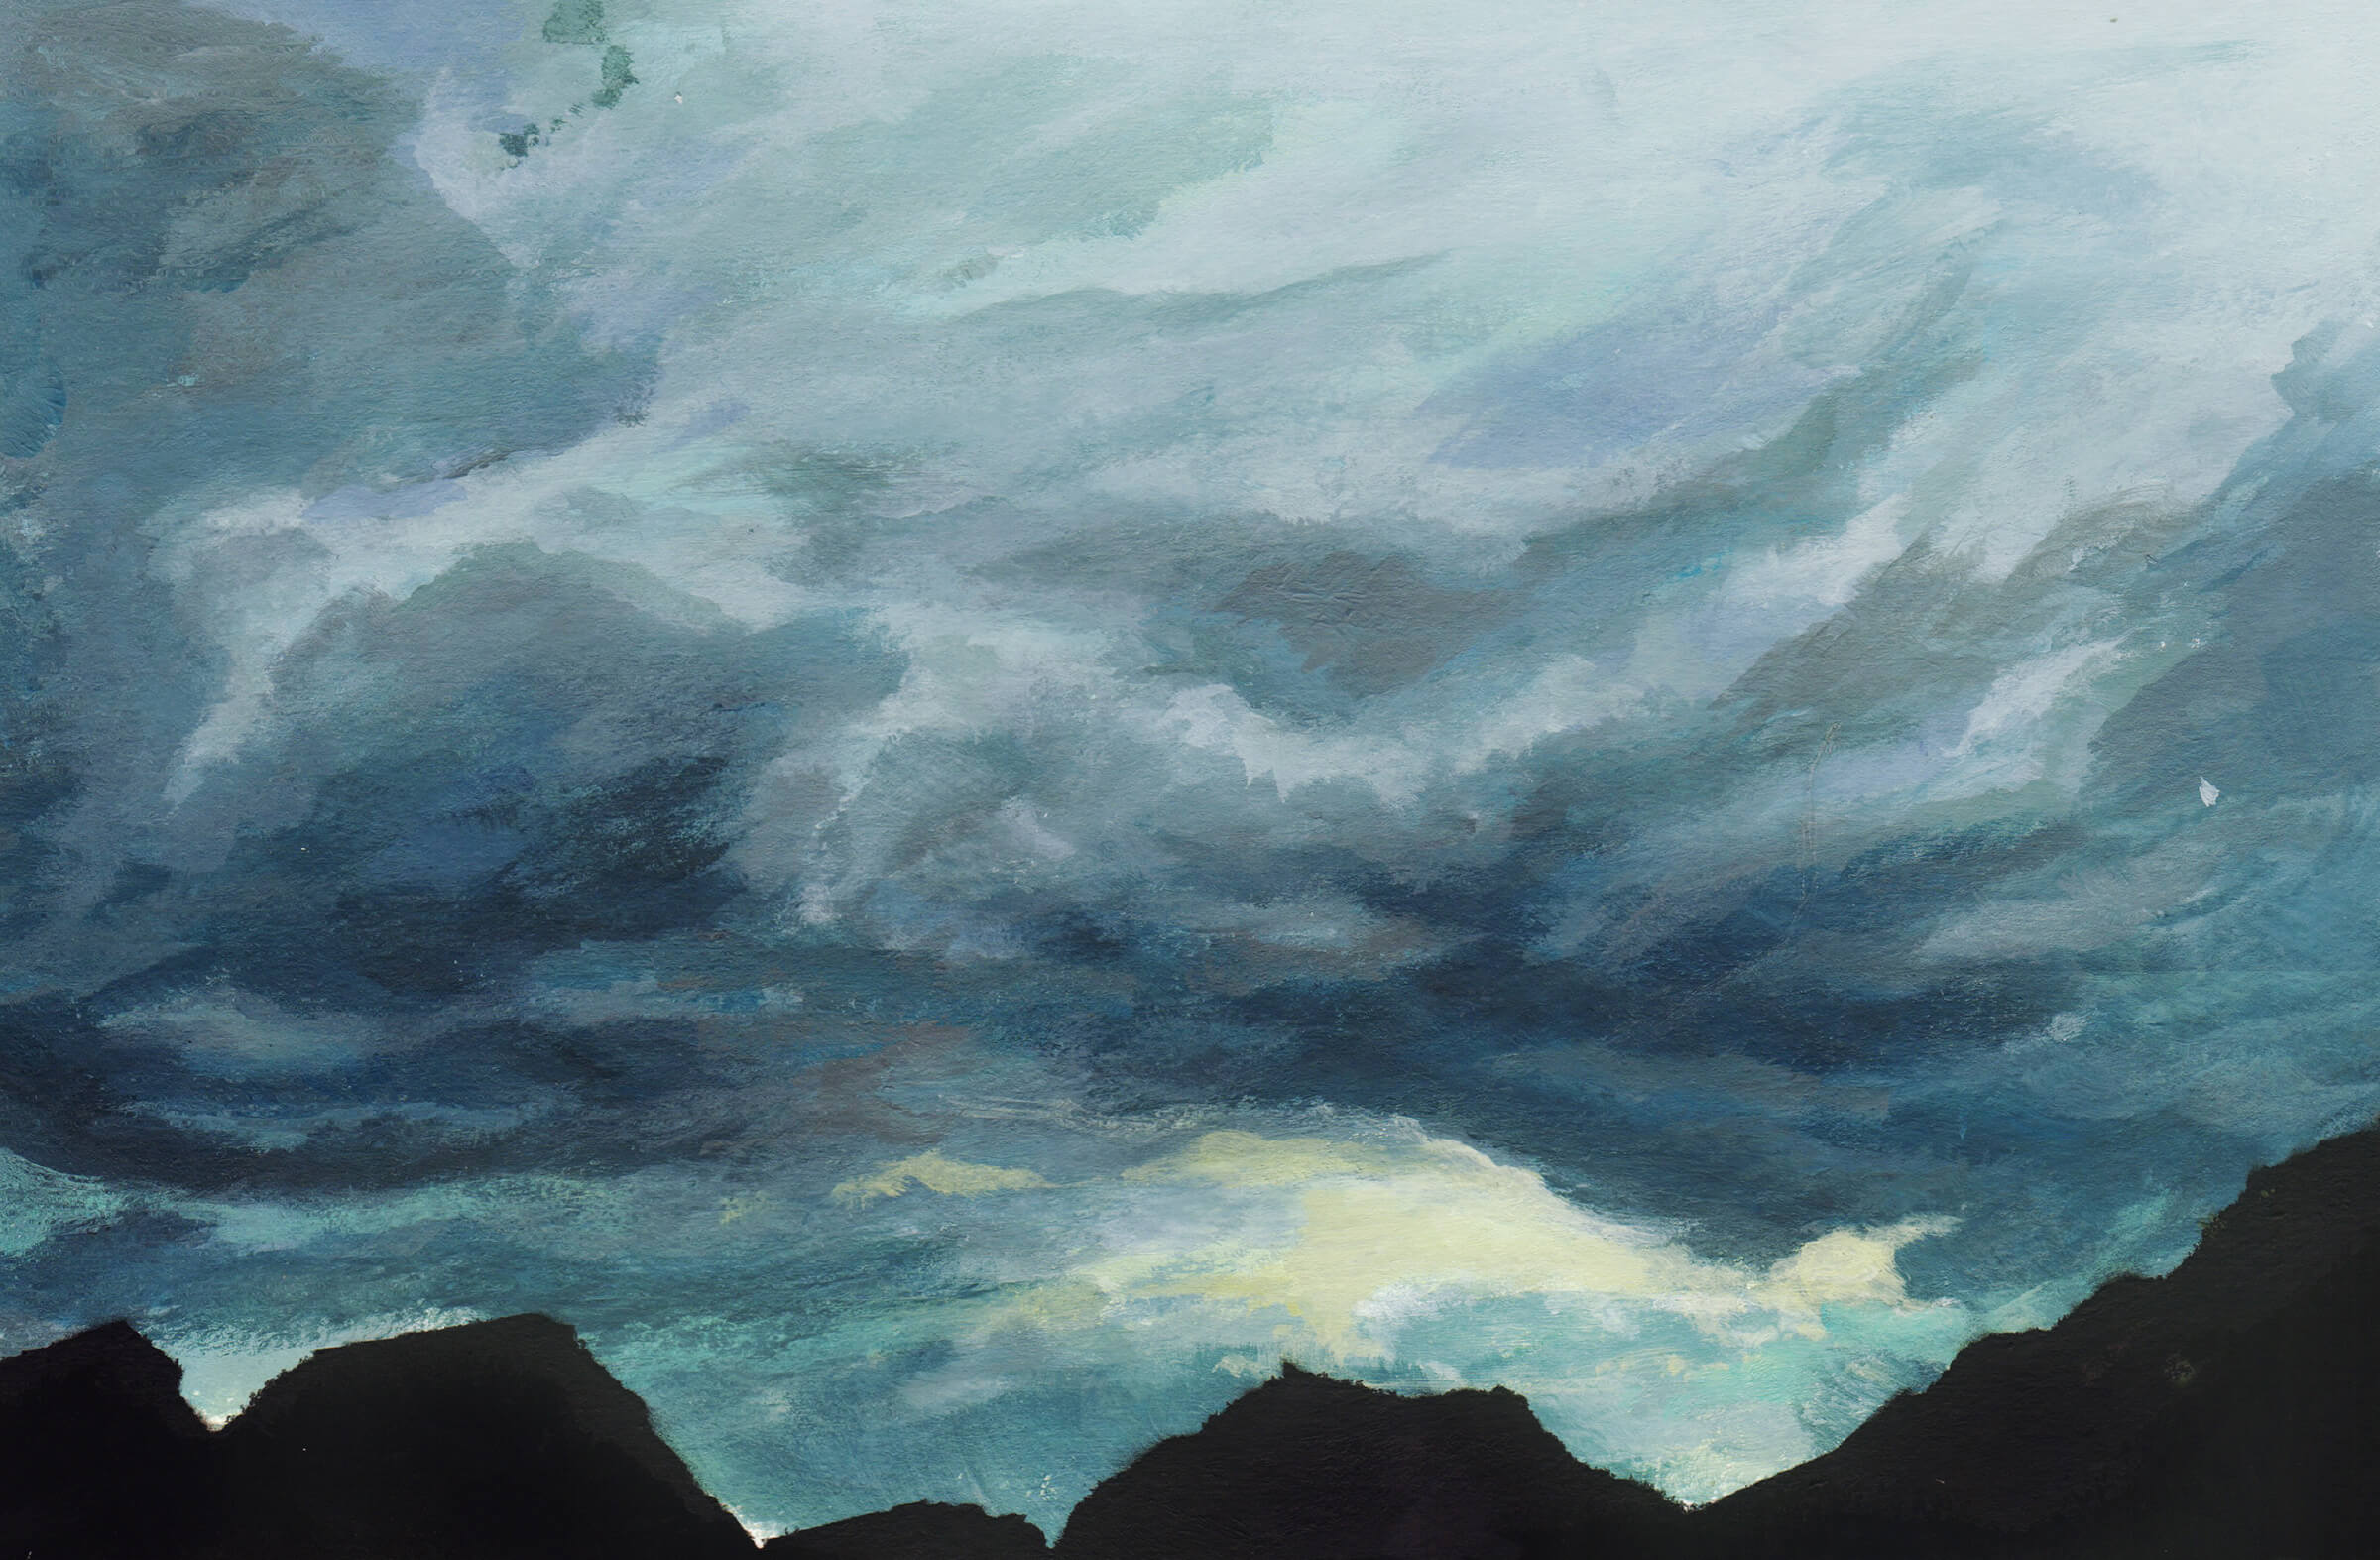 Painting of gathering gray-blue storm clouds above black mountain peaks.